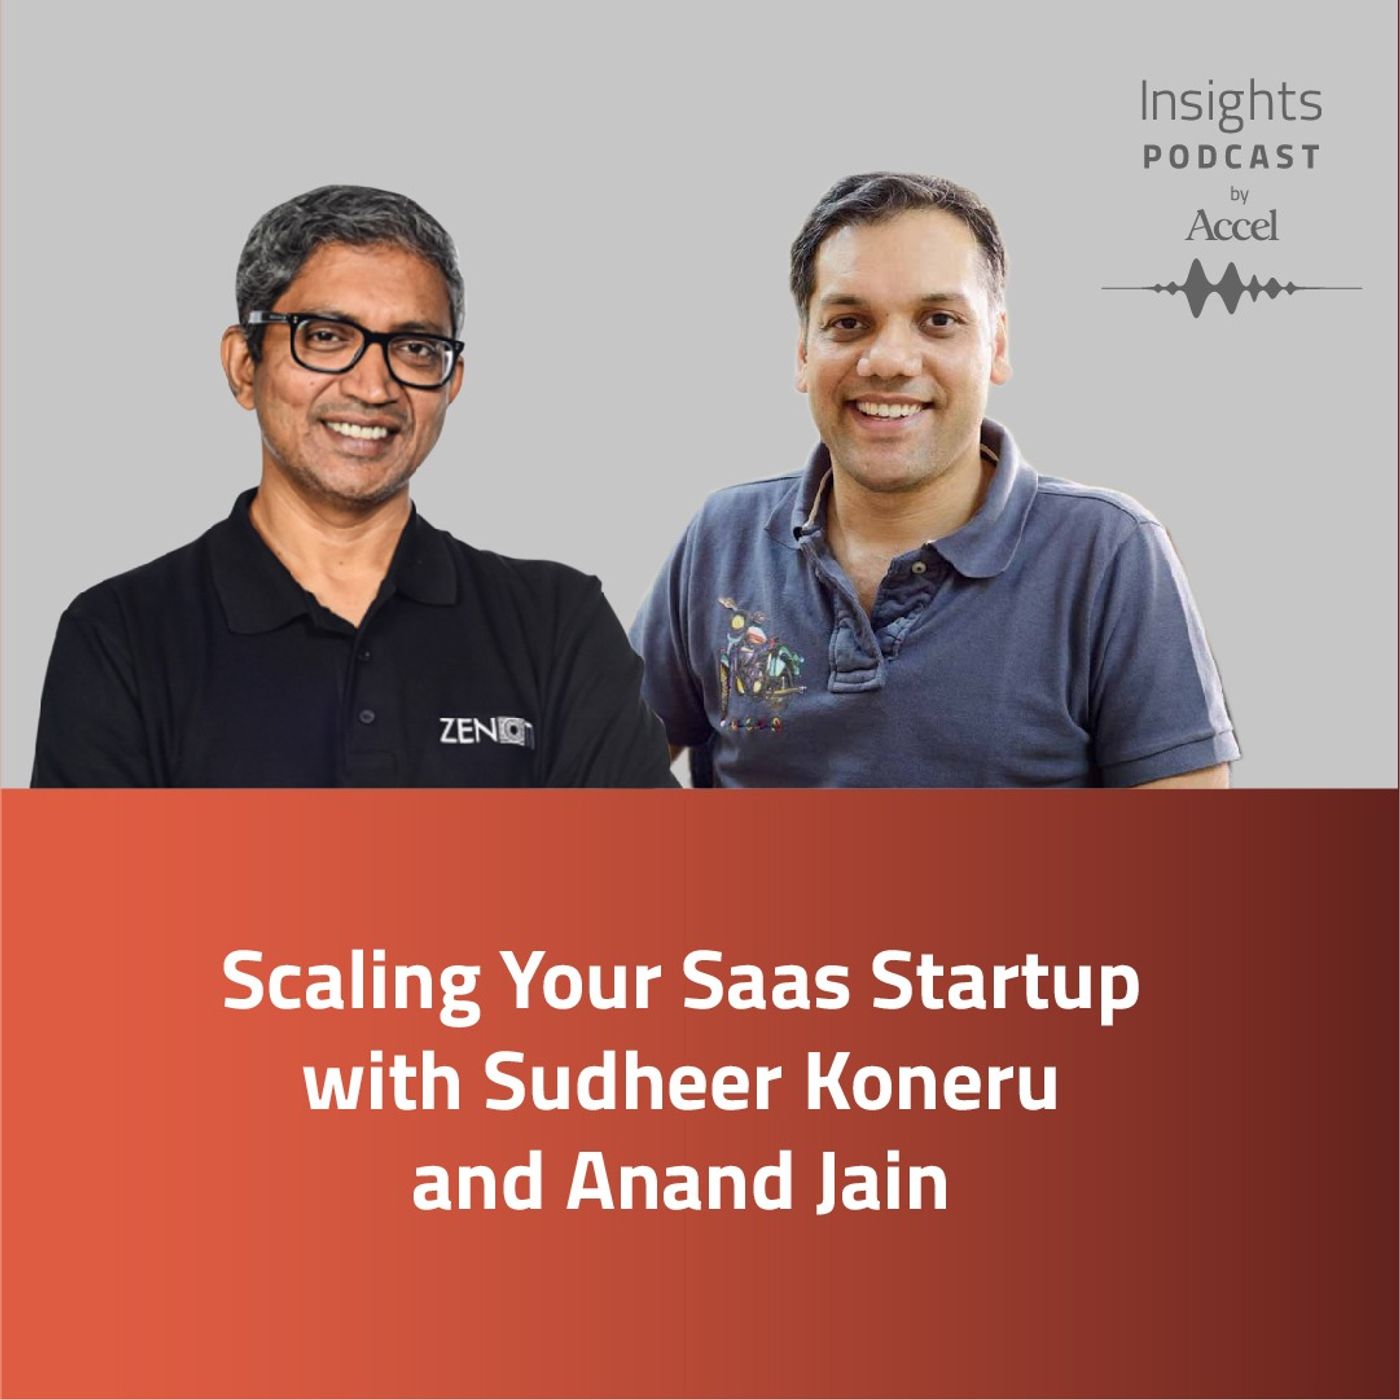 INSIGHTS #52 – Scaling your SaaS Startup with Sudheer Koneru and Anand Jain